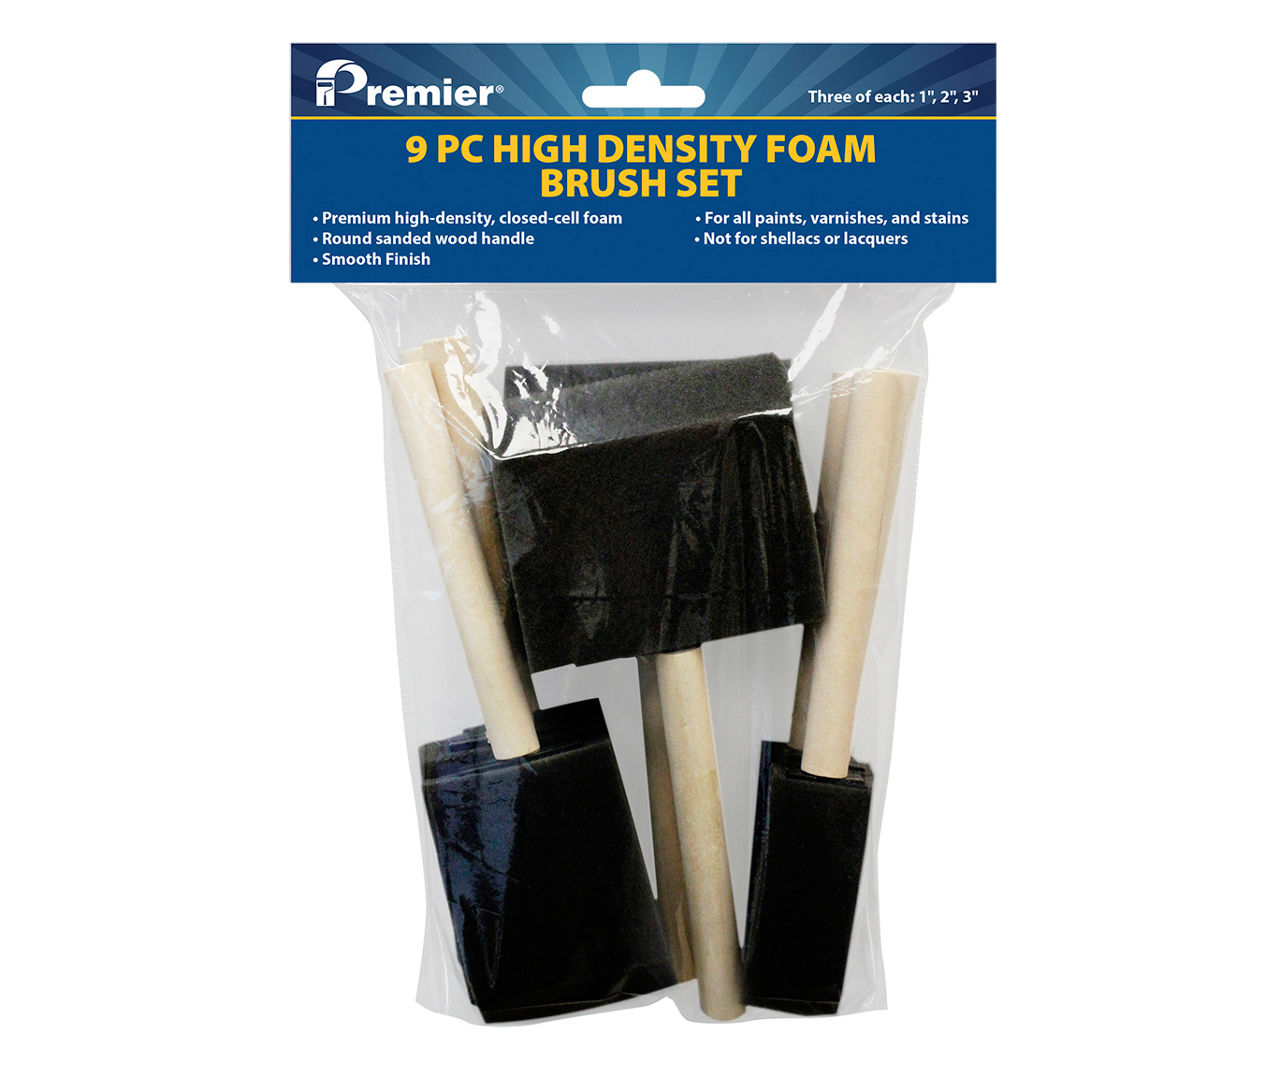 Painting Supplies: Paint Rollers, Brushes & More